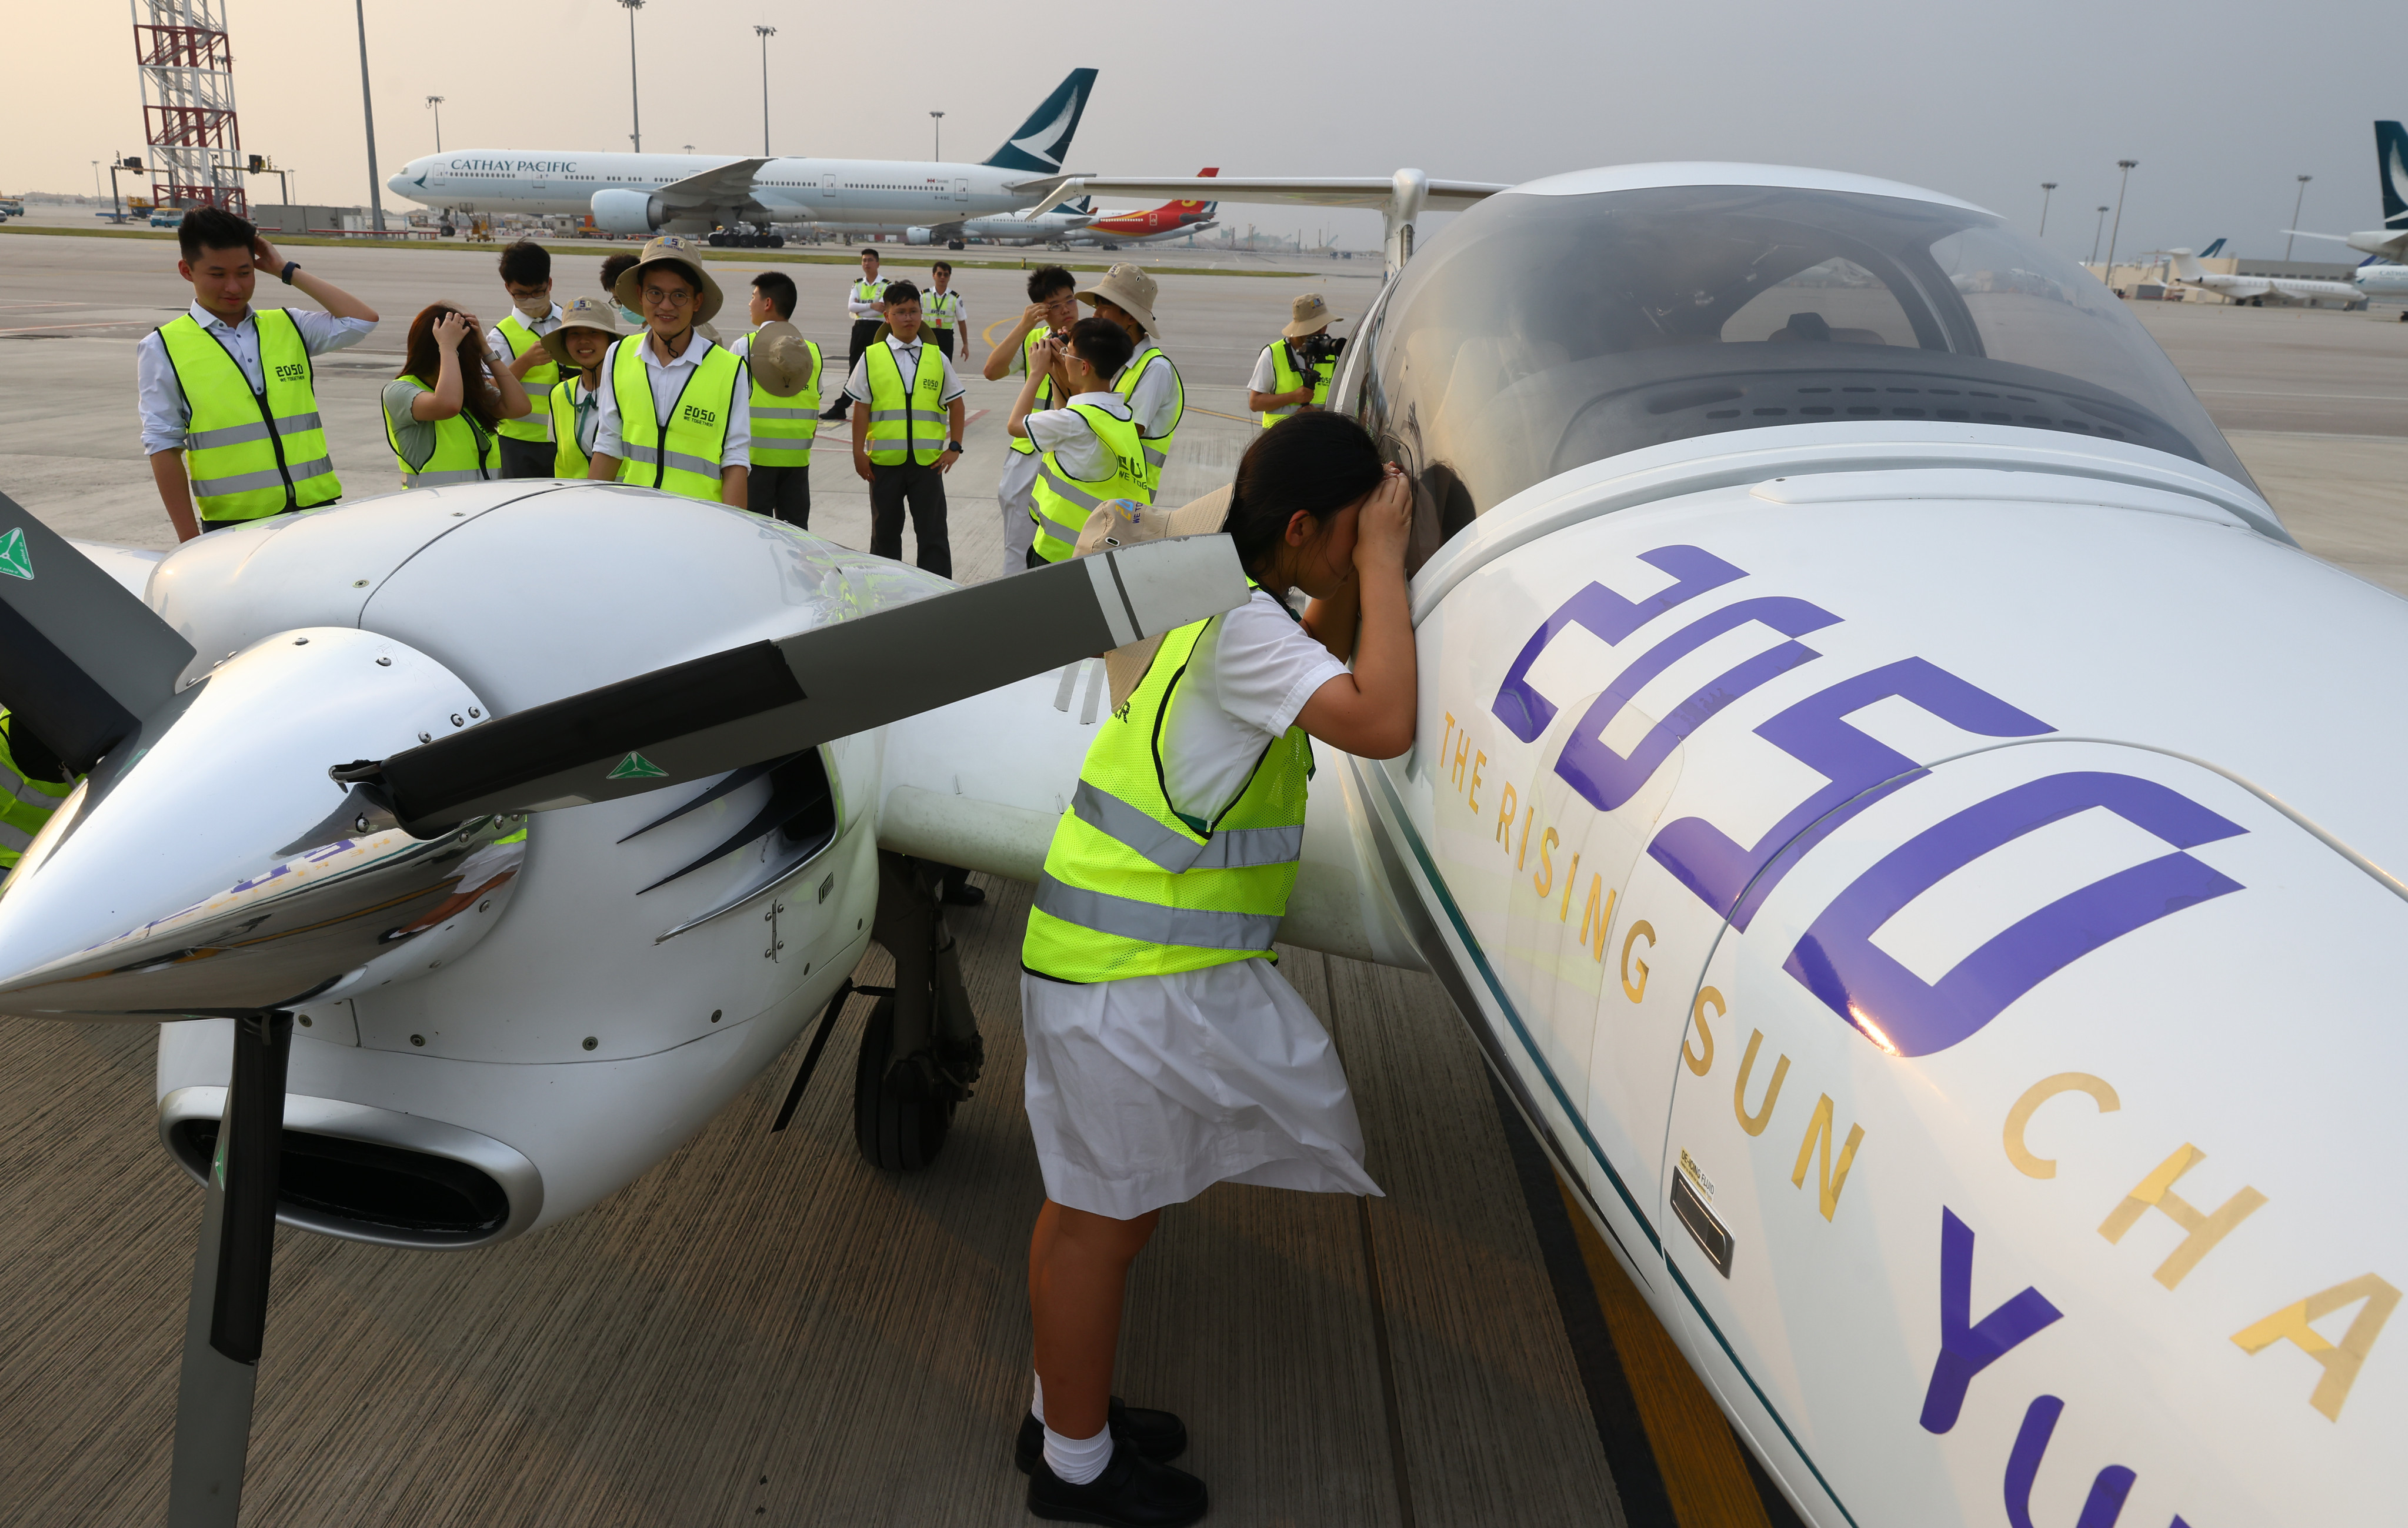 Youngsters from Mu Kuang English School get the chance to examine a Diamond DA42, twin-engined propeller plane, which is on an intercontinental trip to help publicise the “2050” initiative launched by Alibaba Cloud founder Wang Jian. Photo: Dickson Lee